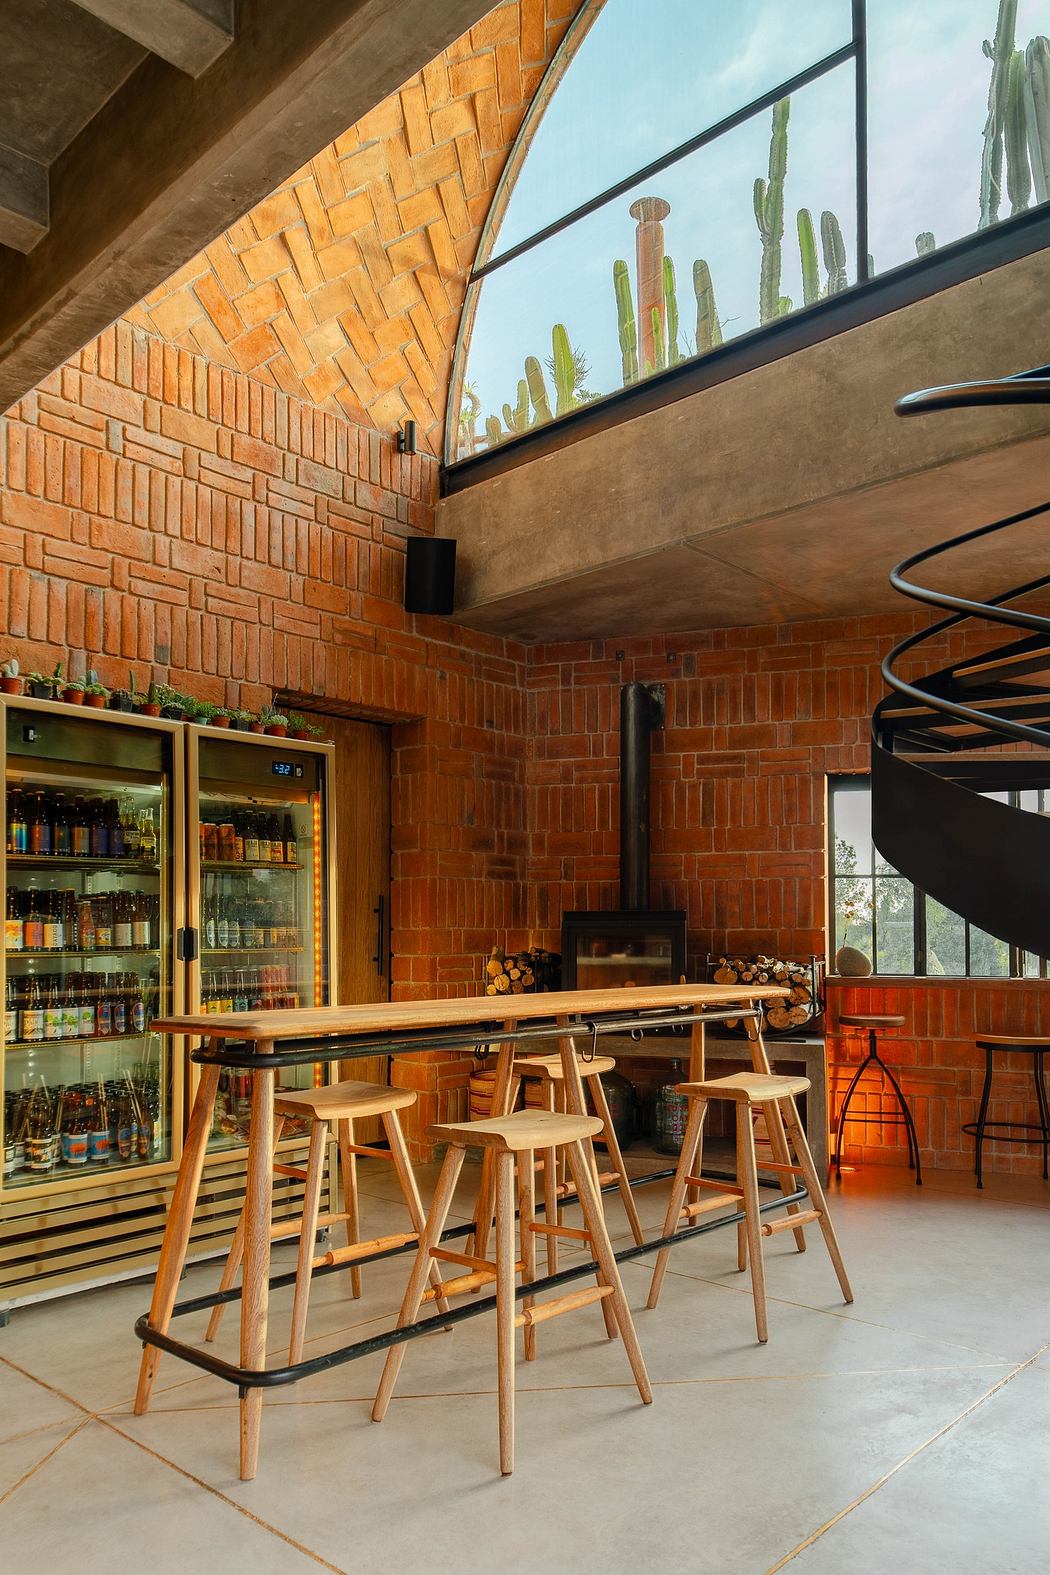 Modern café interior with brick walls, spiral staircase, and wooden stools.